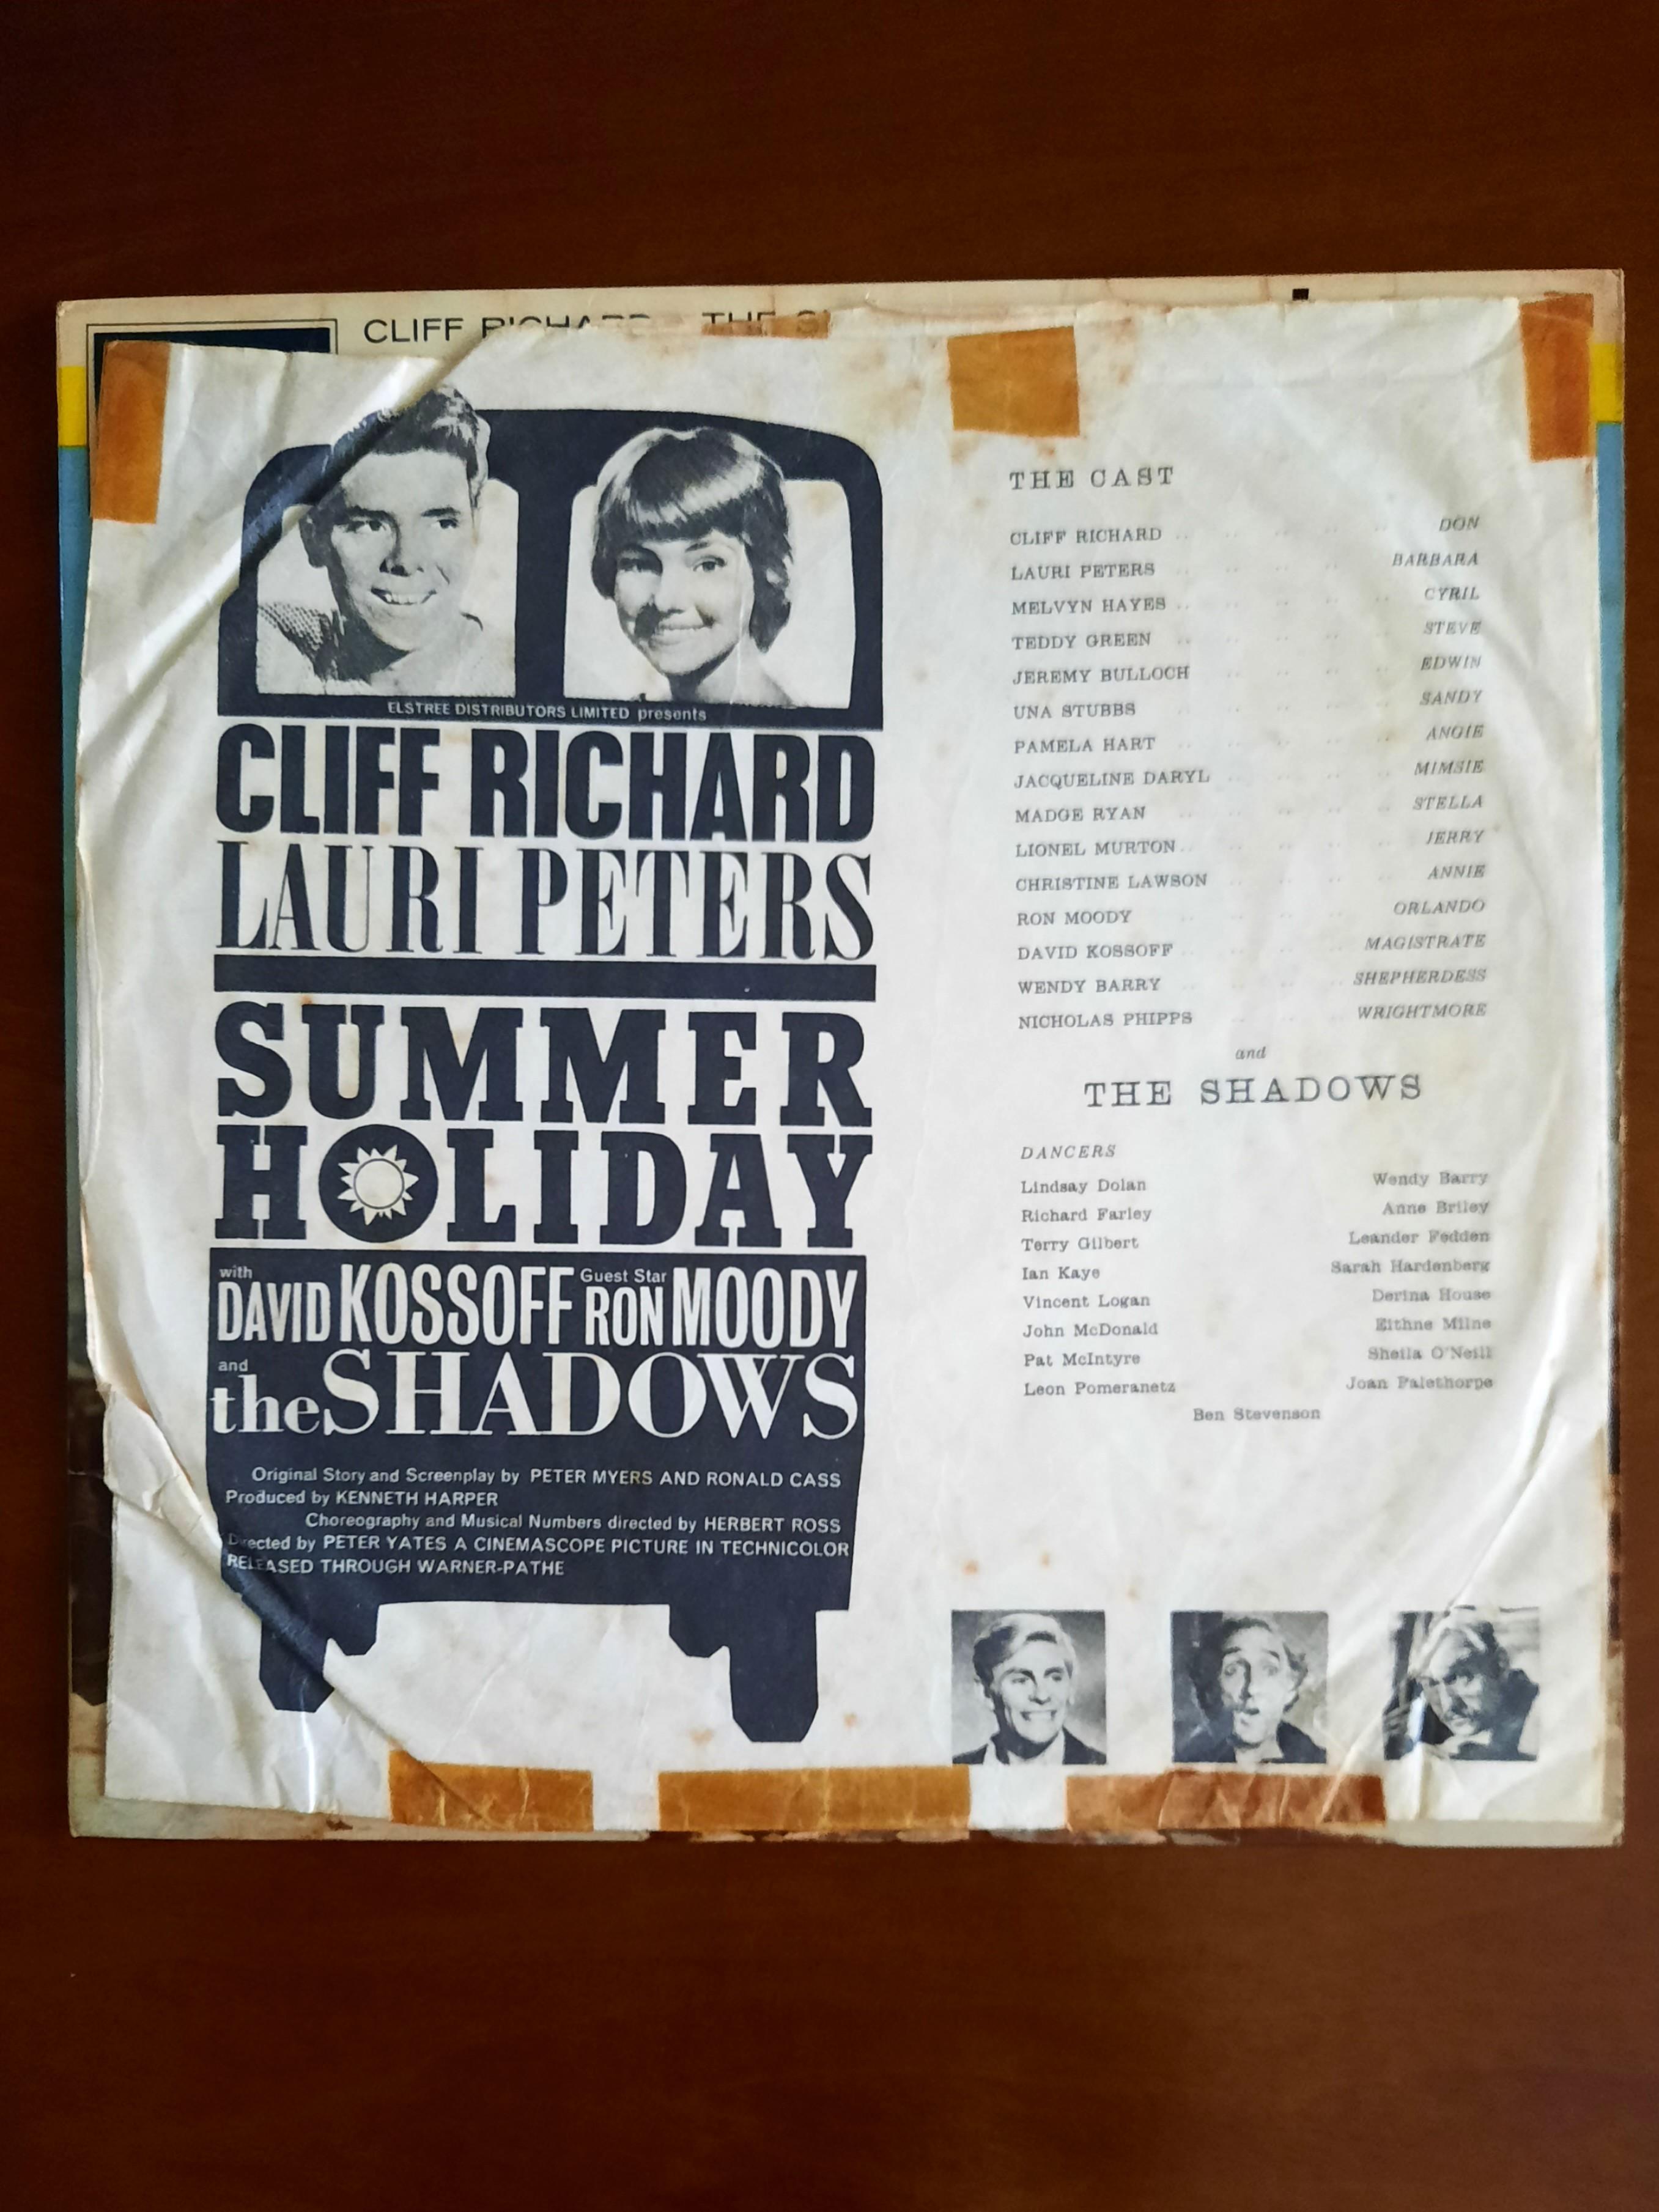 Cliff Richard and The Shadows - Summer Holiday (1963) vinyl LP